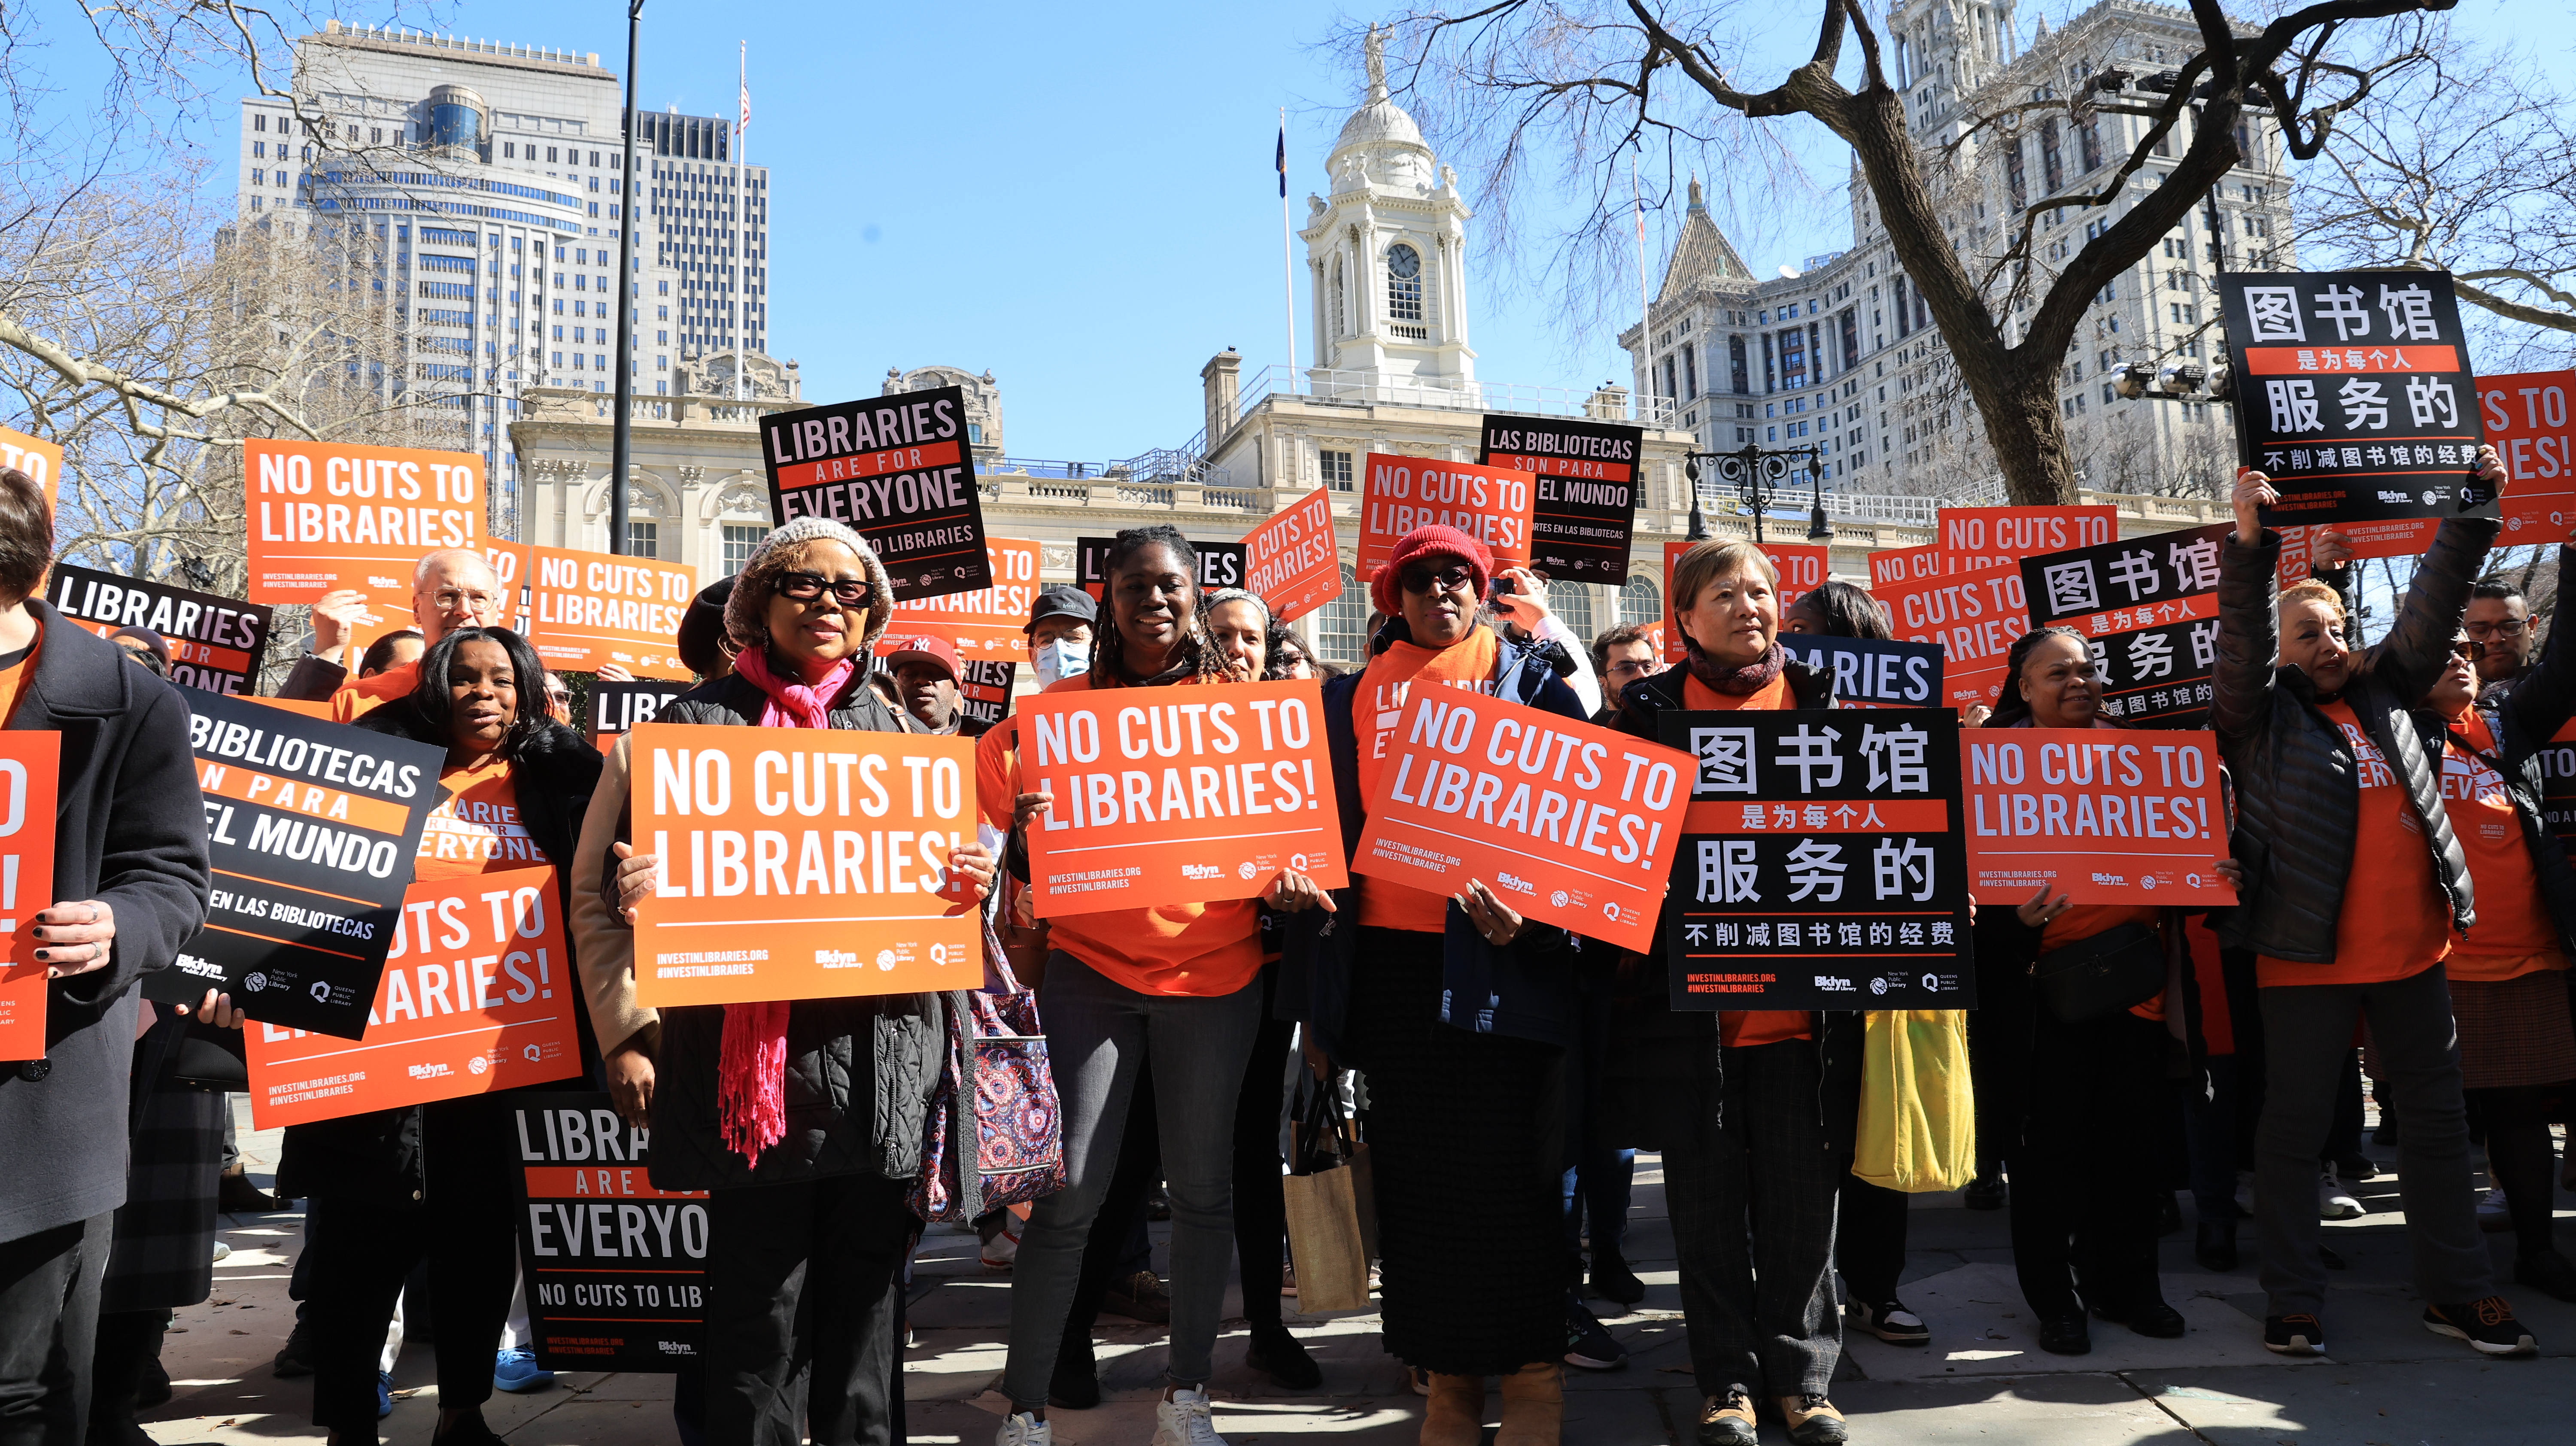 New York City Librarians and supporters rally on City Hall Park early Tuesday March 12, 2024. The Presidents of New York City's three public library systems attended the rally and called for reversal of the $58.3M in proposed budget cuts by Mayor Adams. (Luiz C. Ribeiro for NY Daily News)